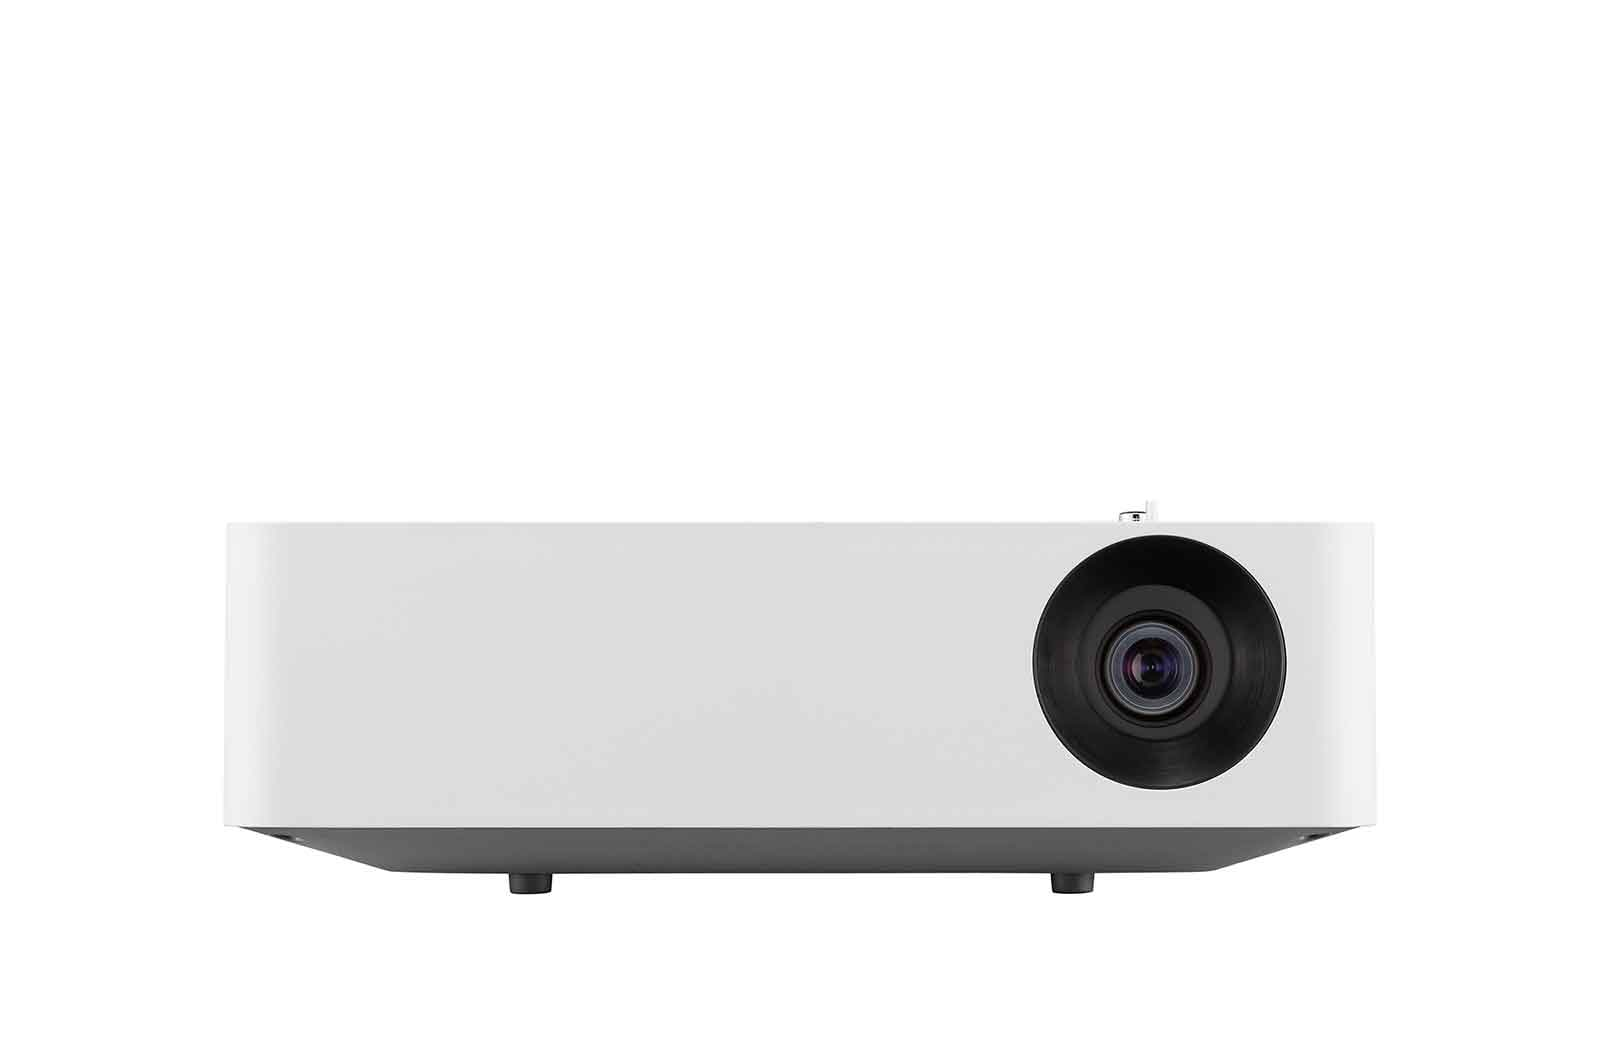 LG LED Portable Home Theater CineBeam Projector - PF610P